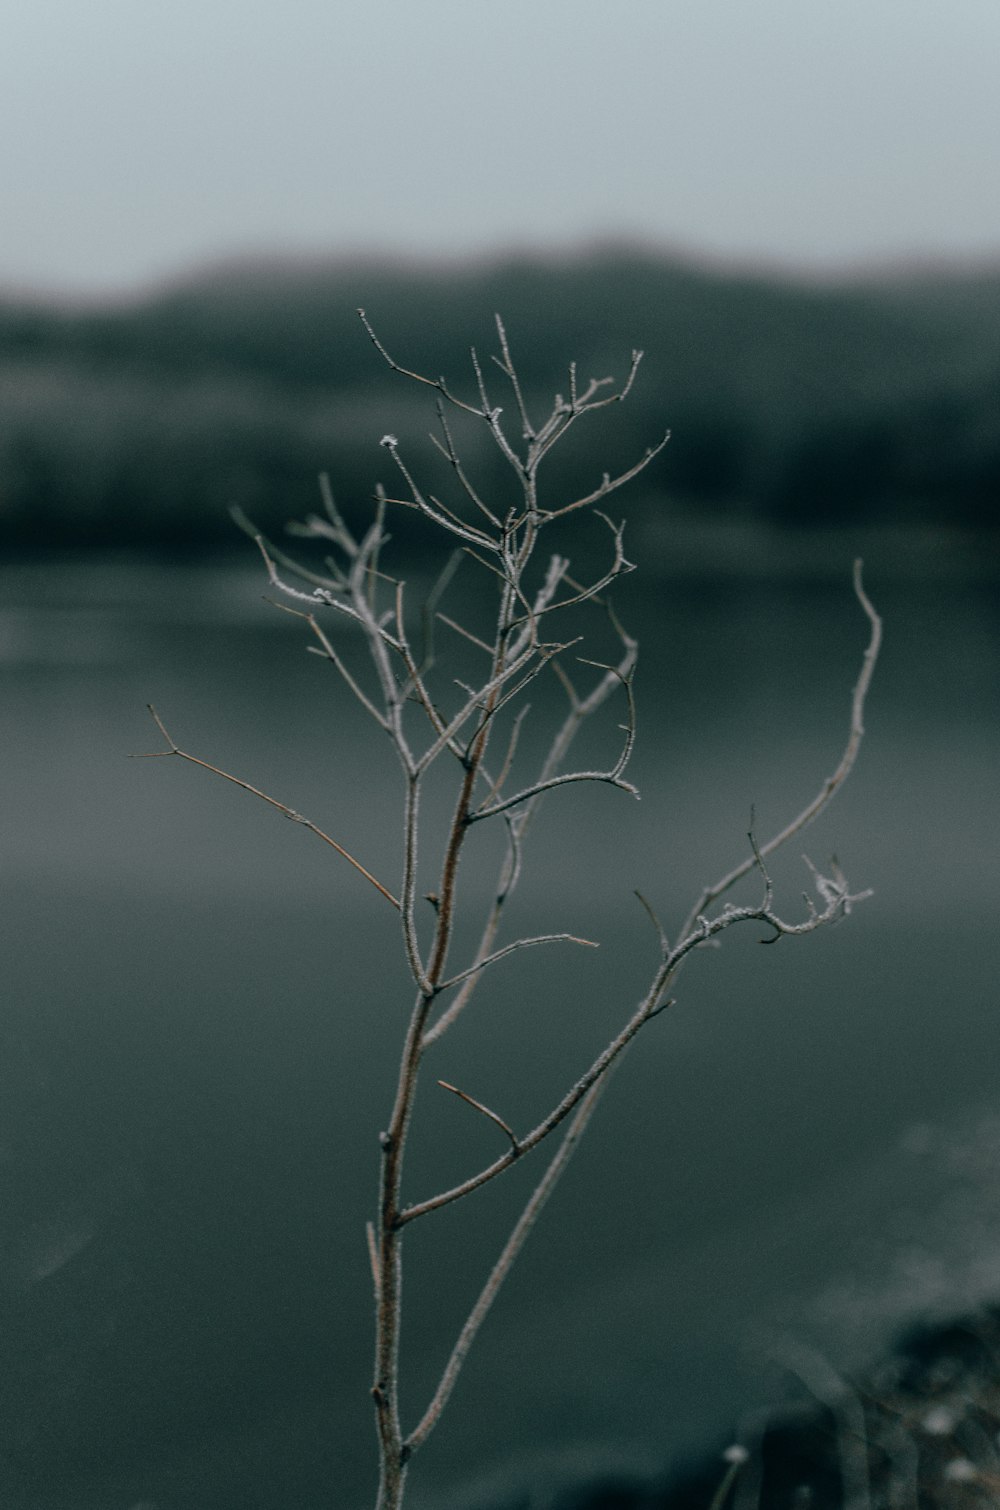 a small tree with no leaves in front of a body of water